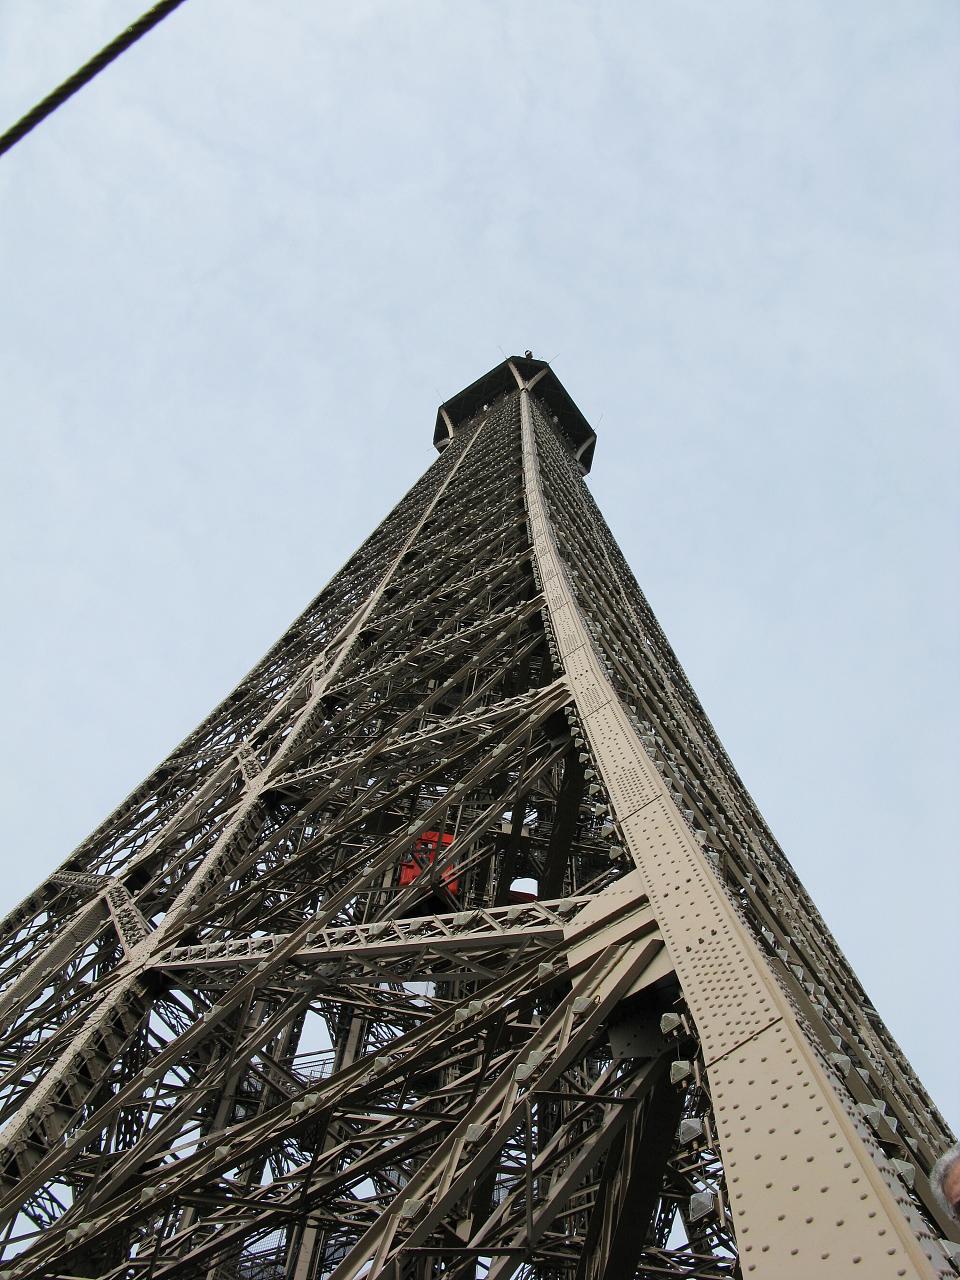 an upward view of the eiffel tower against a blue sky